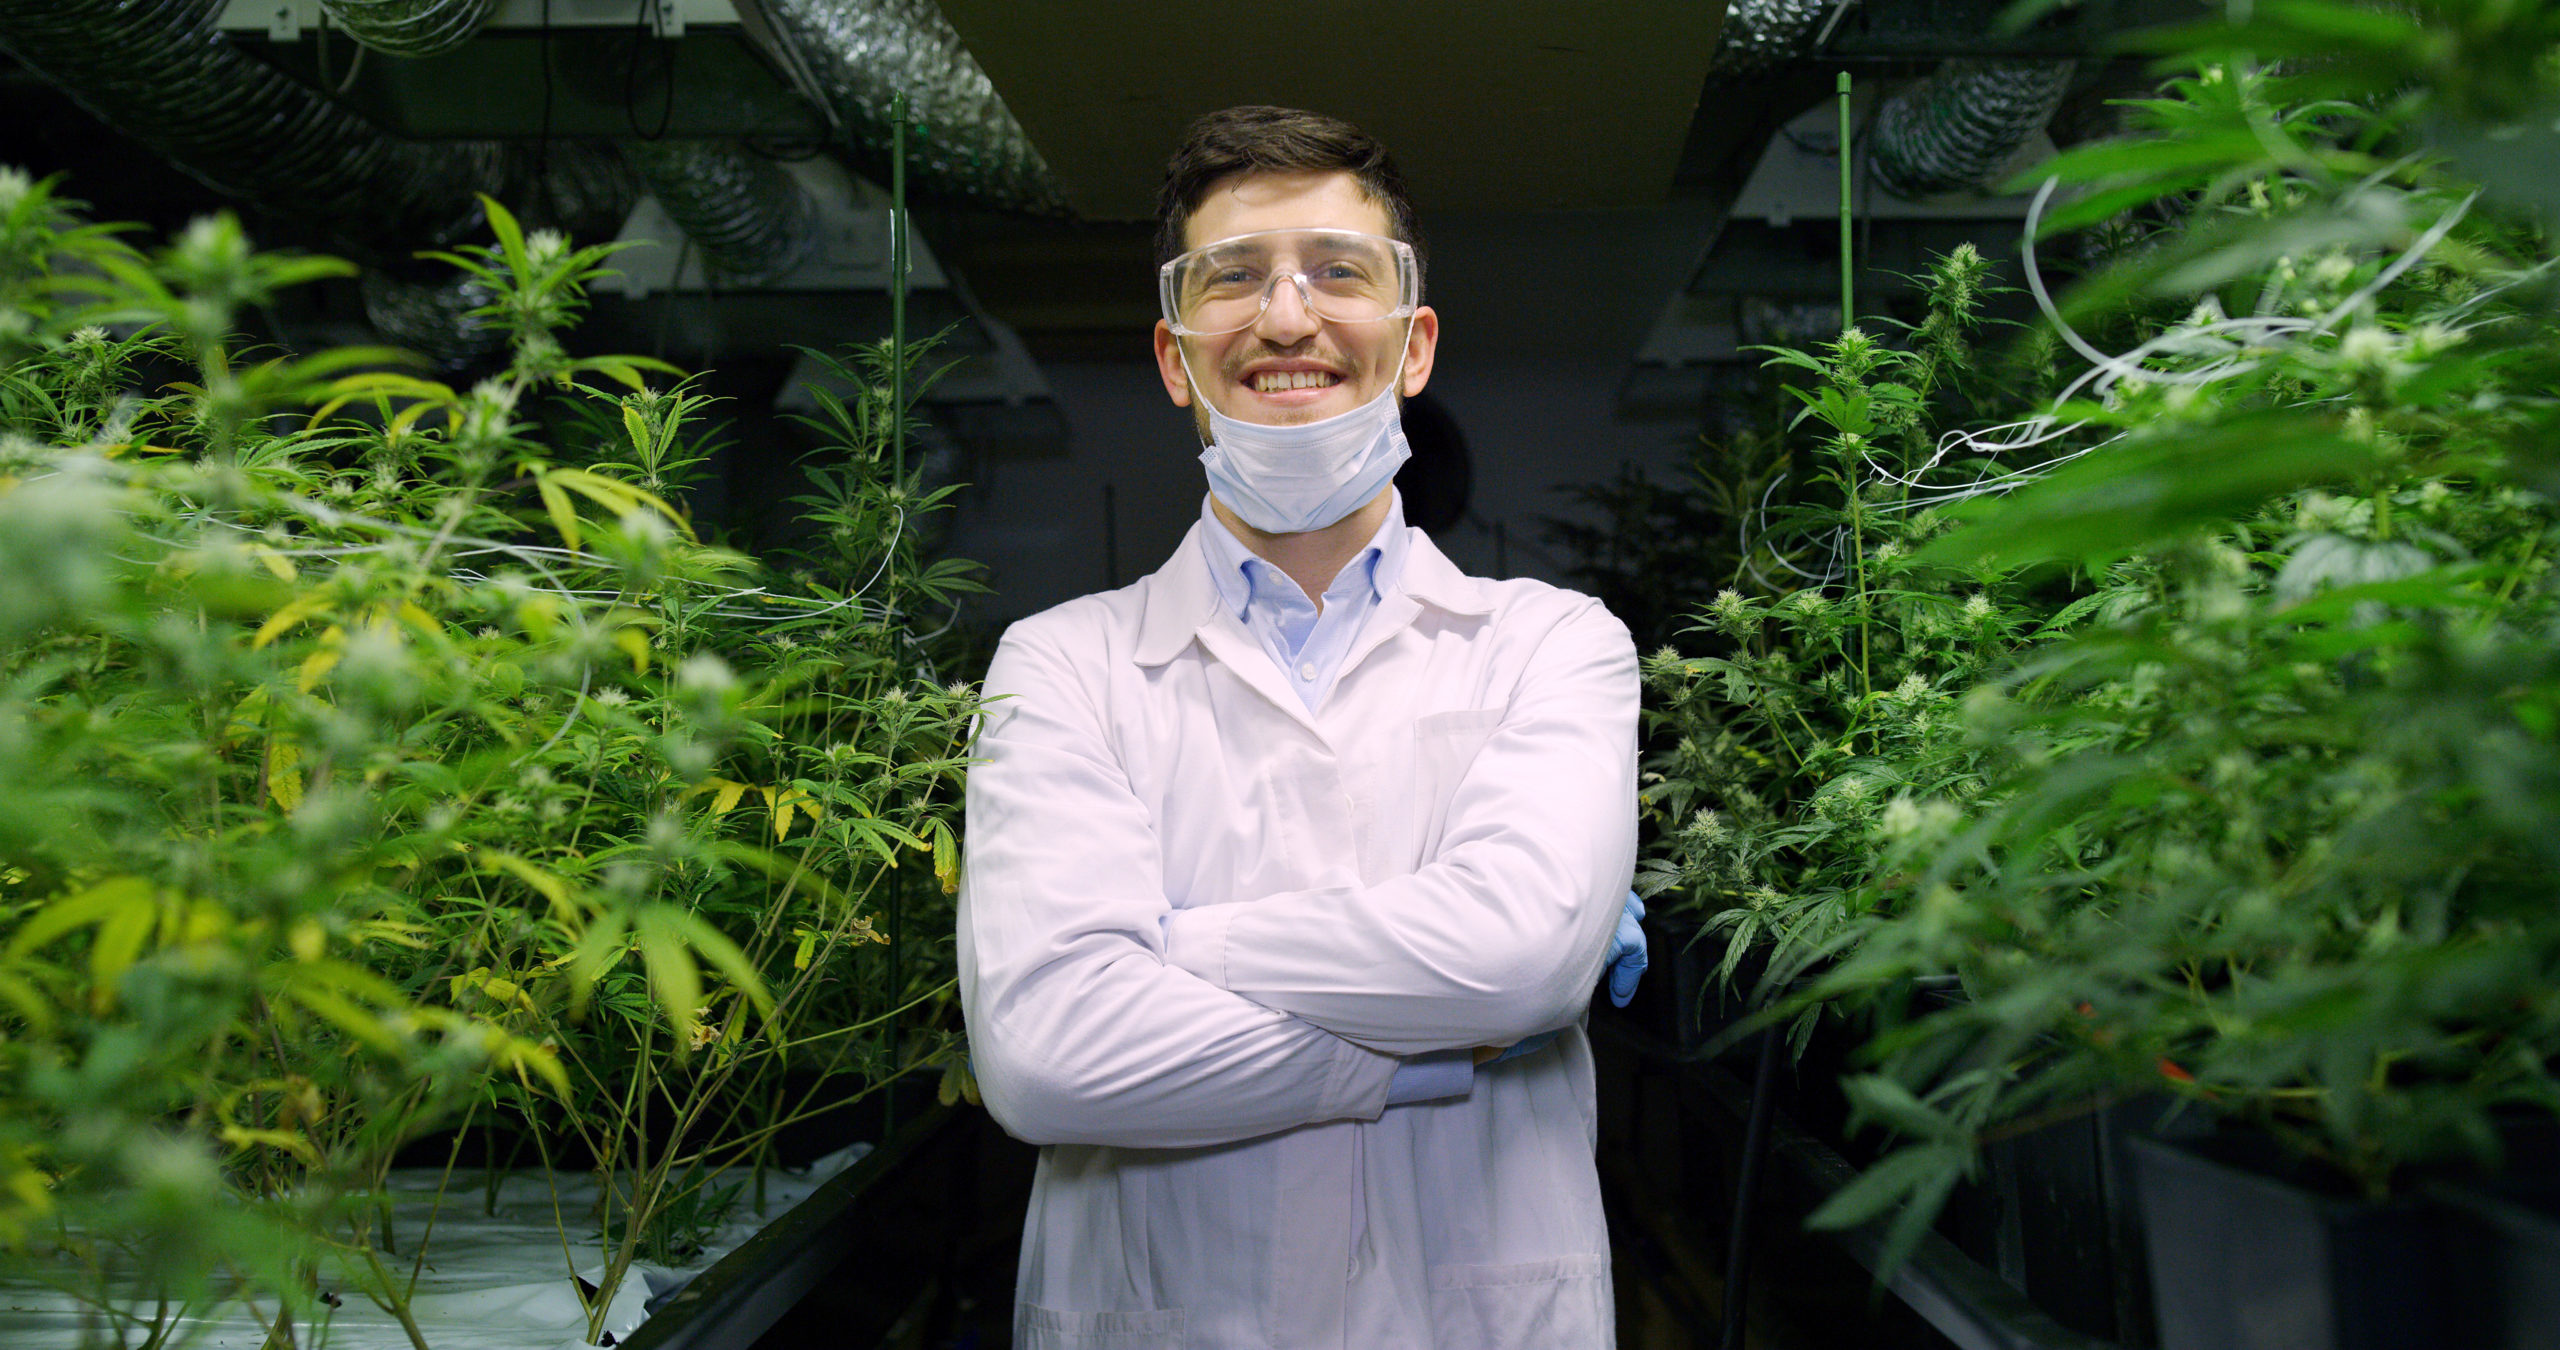 Photo: A CBD industry worker smiles with arms crossed, standing between rows of hemp plants in a greenhouse. He's wearing a lab coat and aa mask pulled down to his chin.